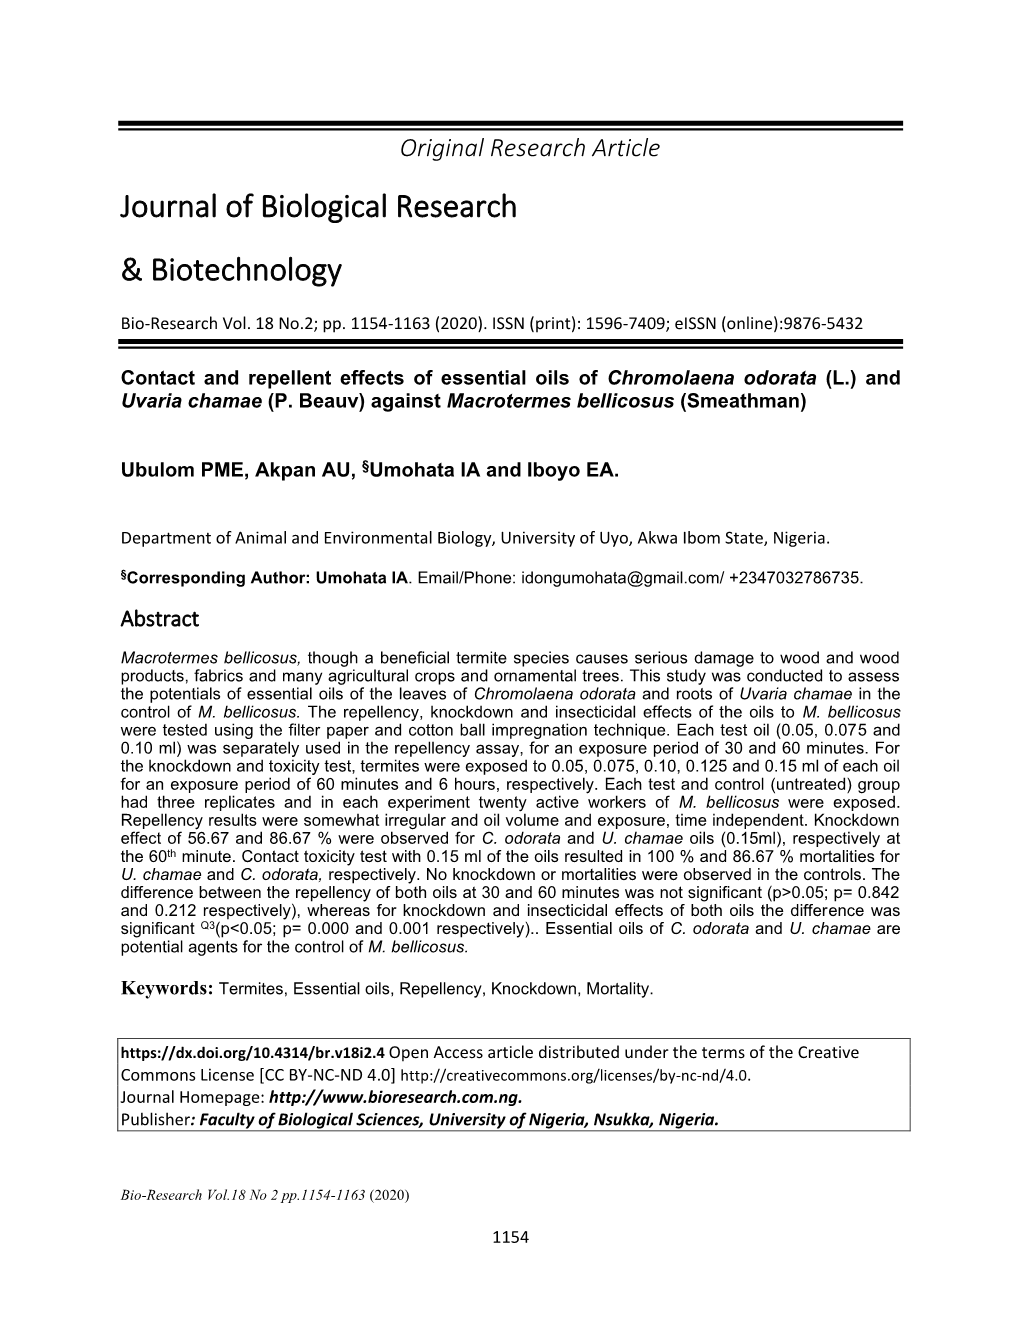 Journal of Biological Research & Biotechnology